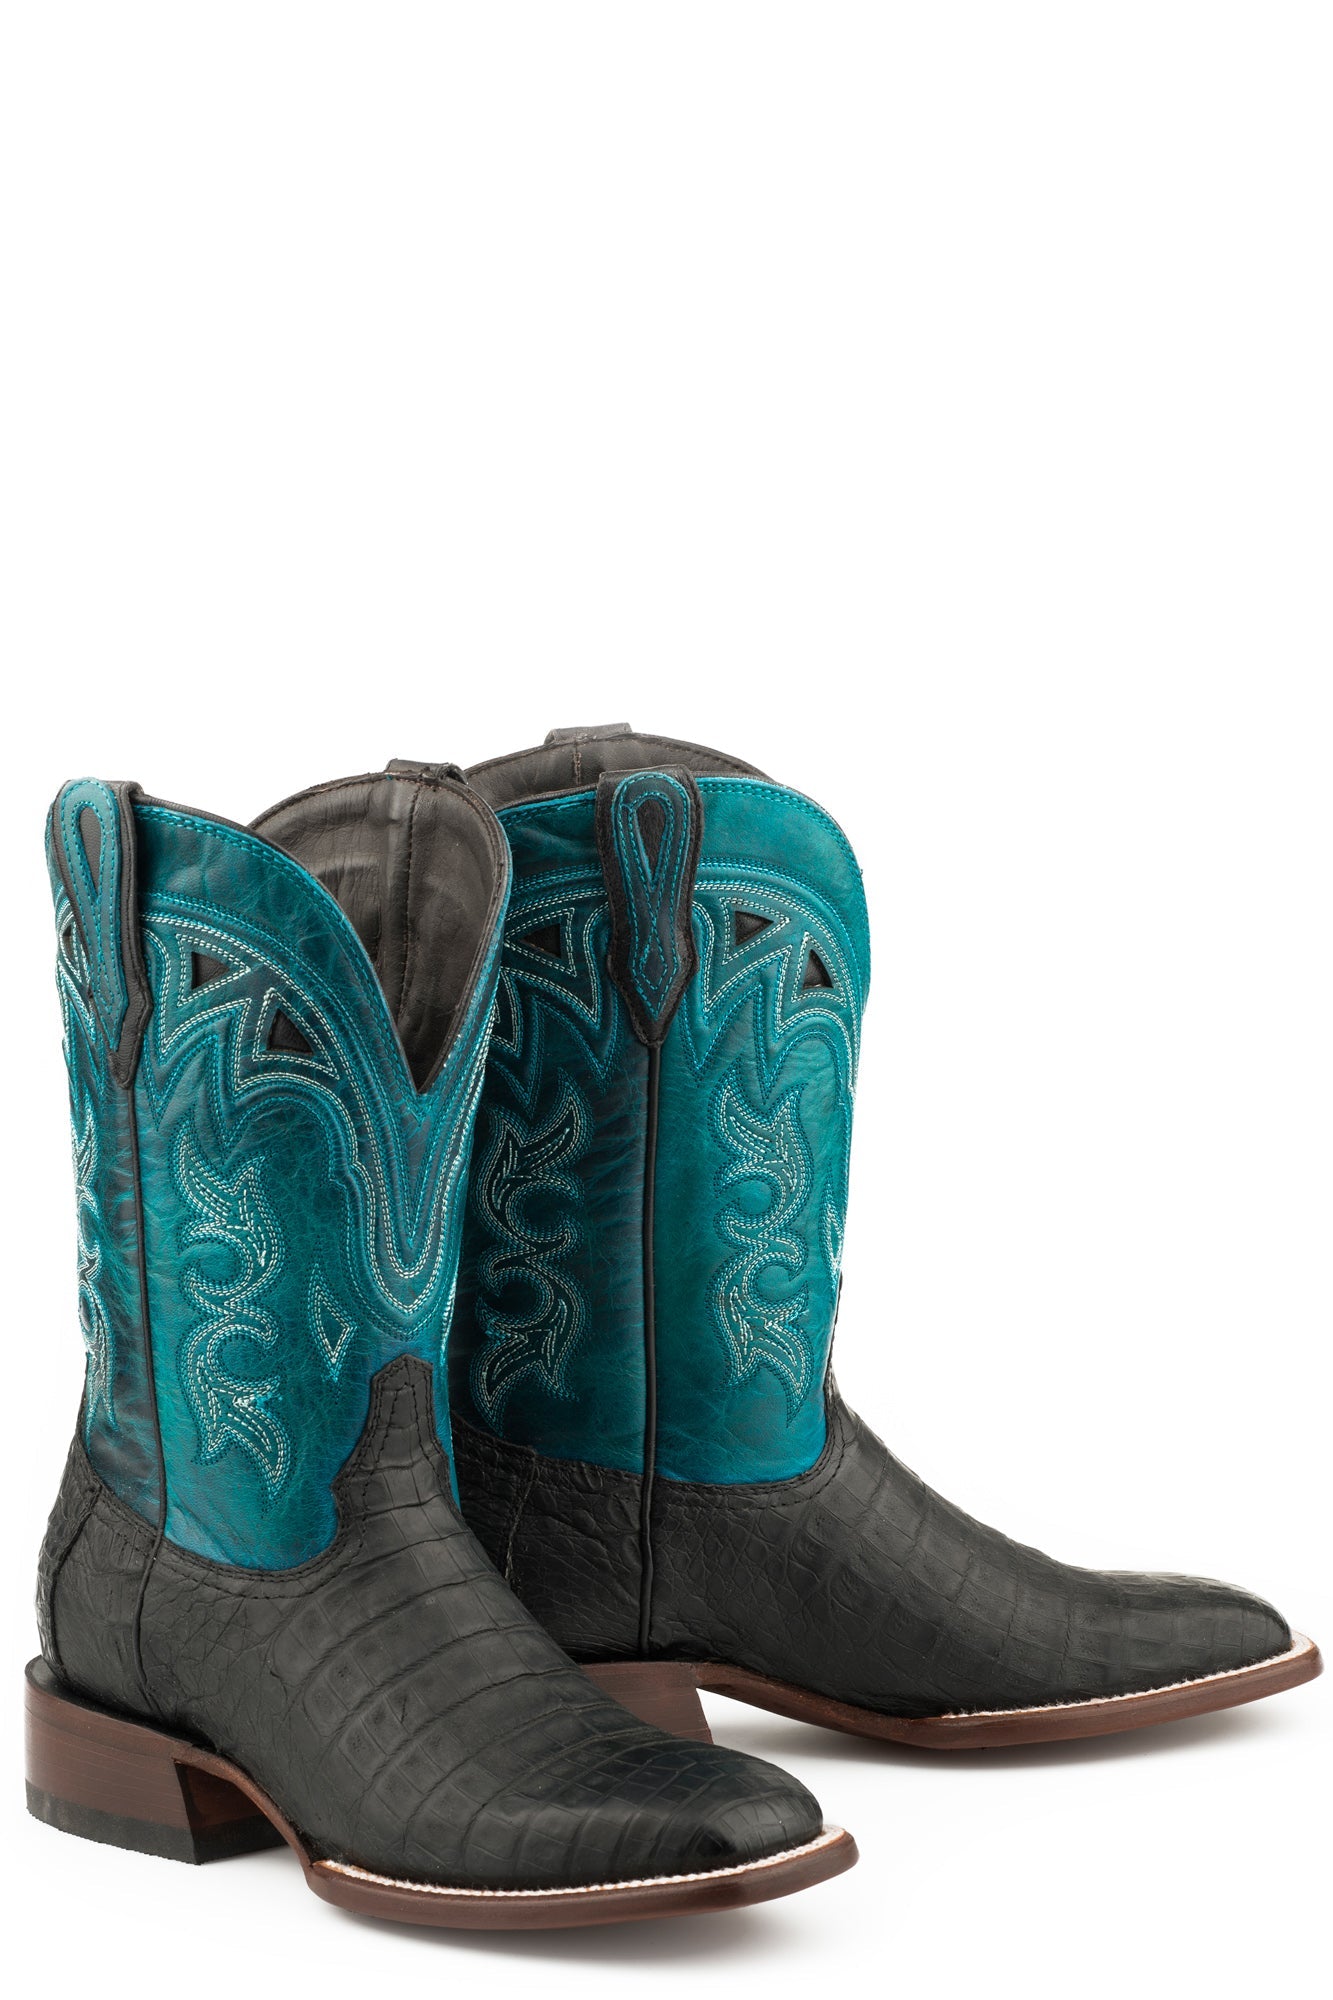 black and turquoise boots